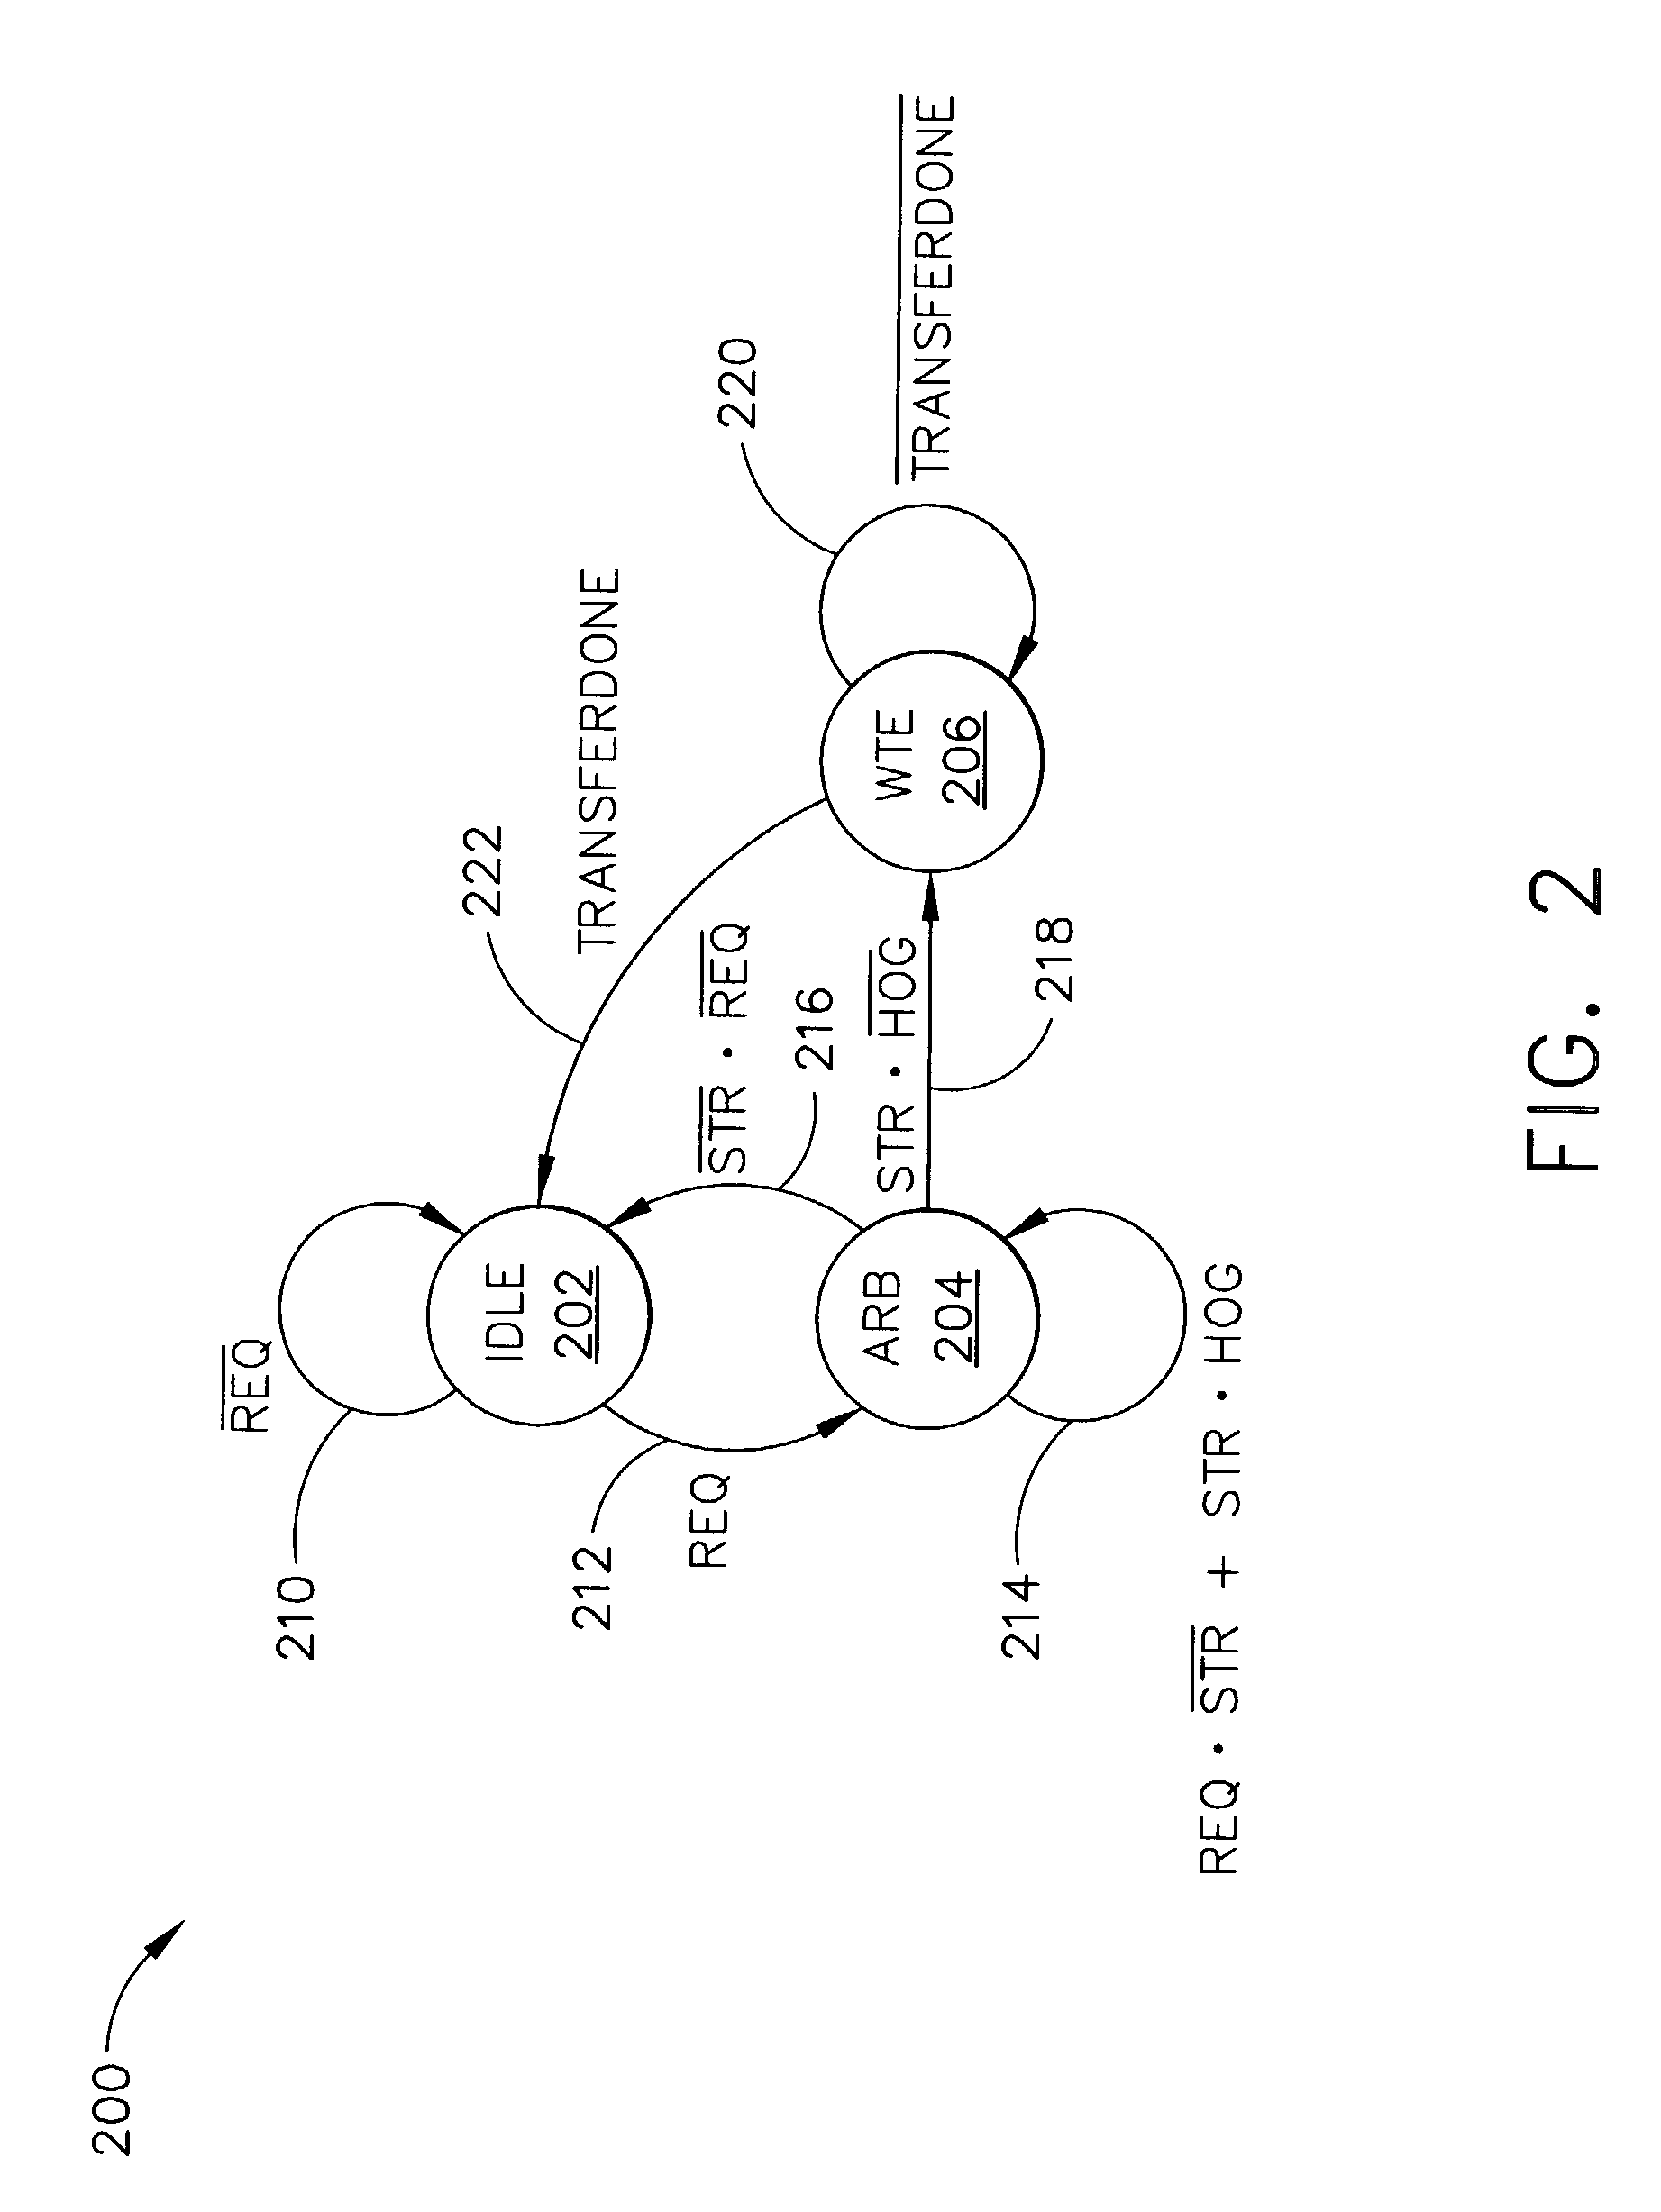 Method and apparatus for lowering bus clock frequency in a complex integrated data processing system